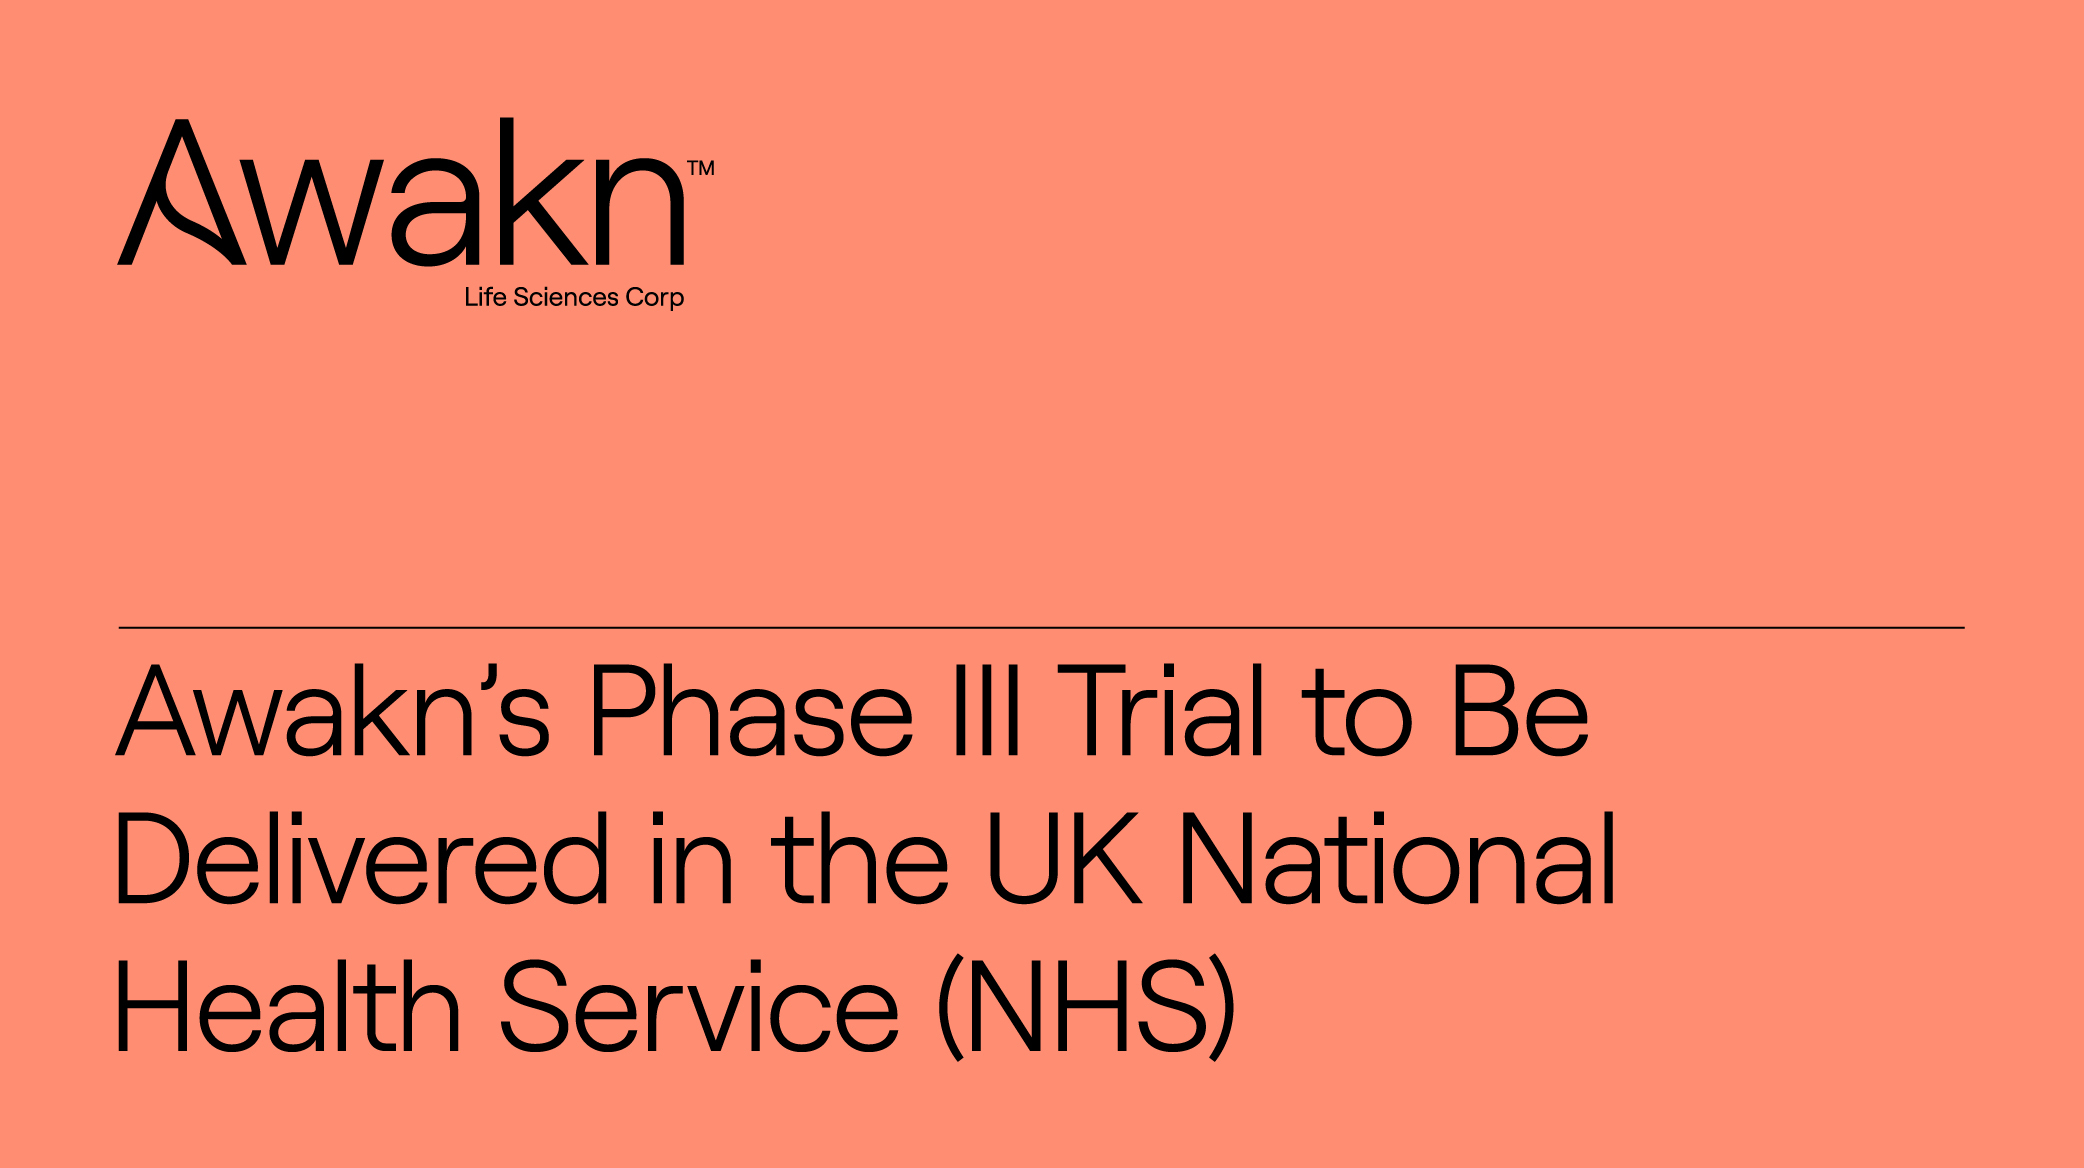 Awakn Life Sciences’ Phase III Trial to Be Delivered in the UK National Health Service (NHS)